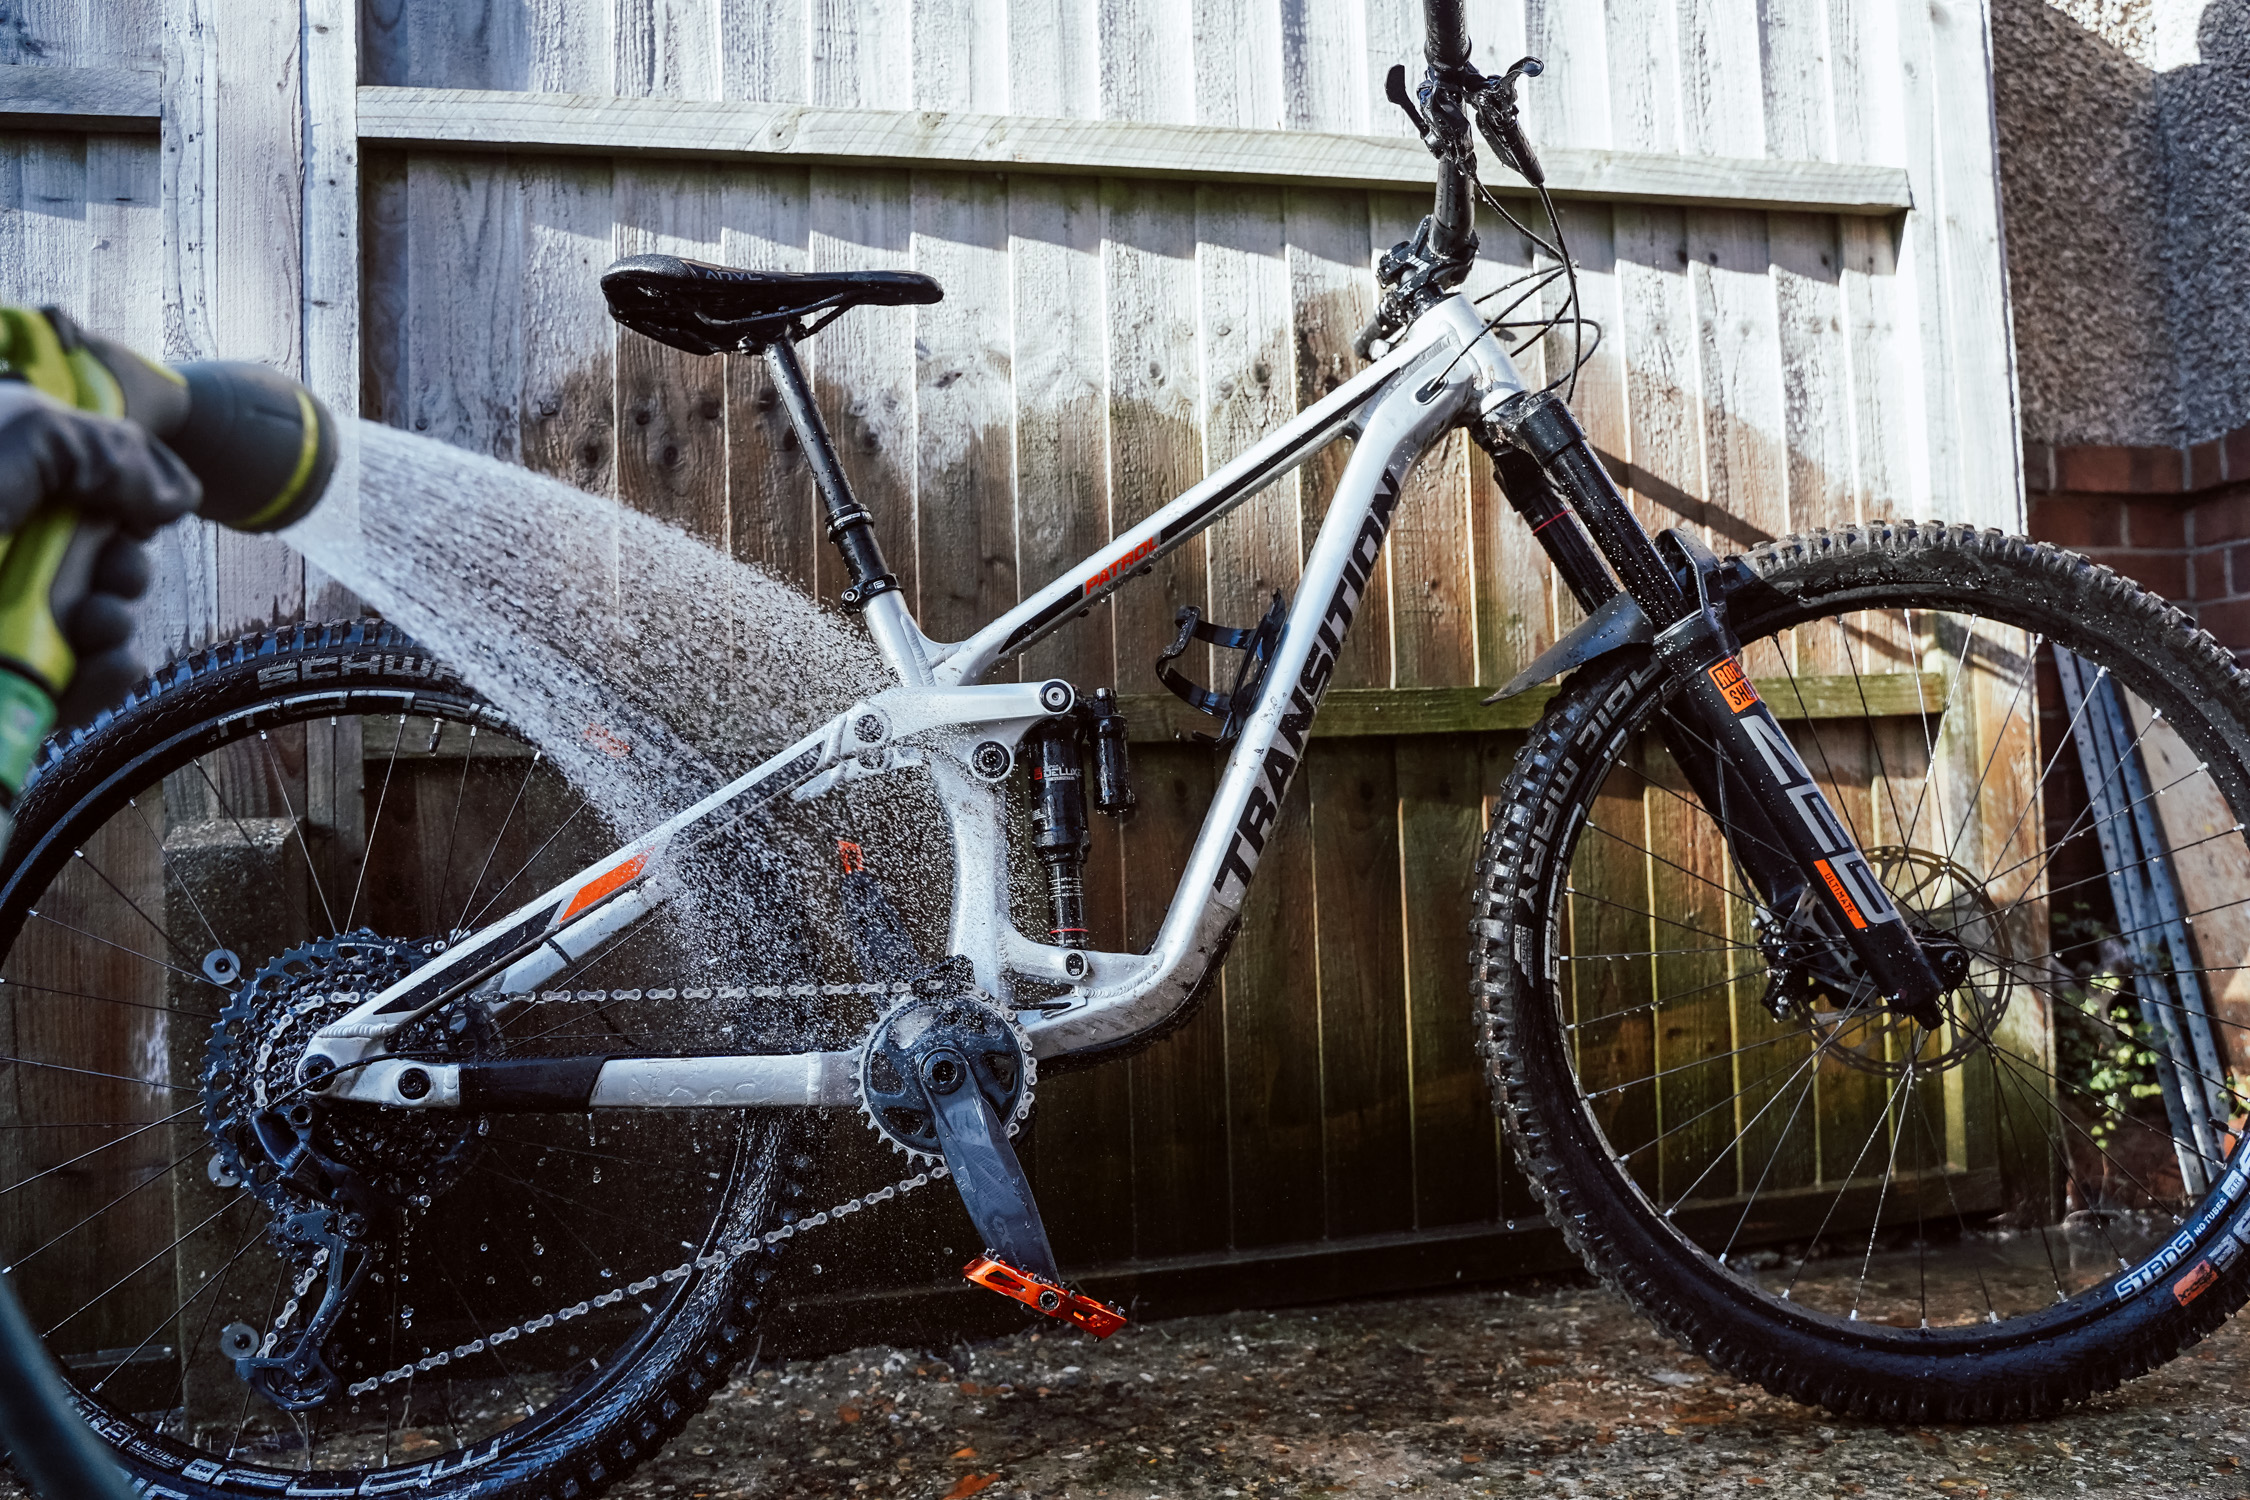 How to clean your mountain bike - Pre-rinse your mountain bike